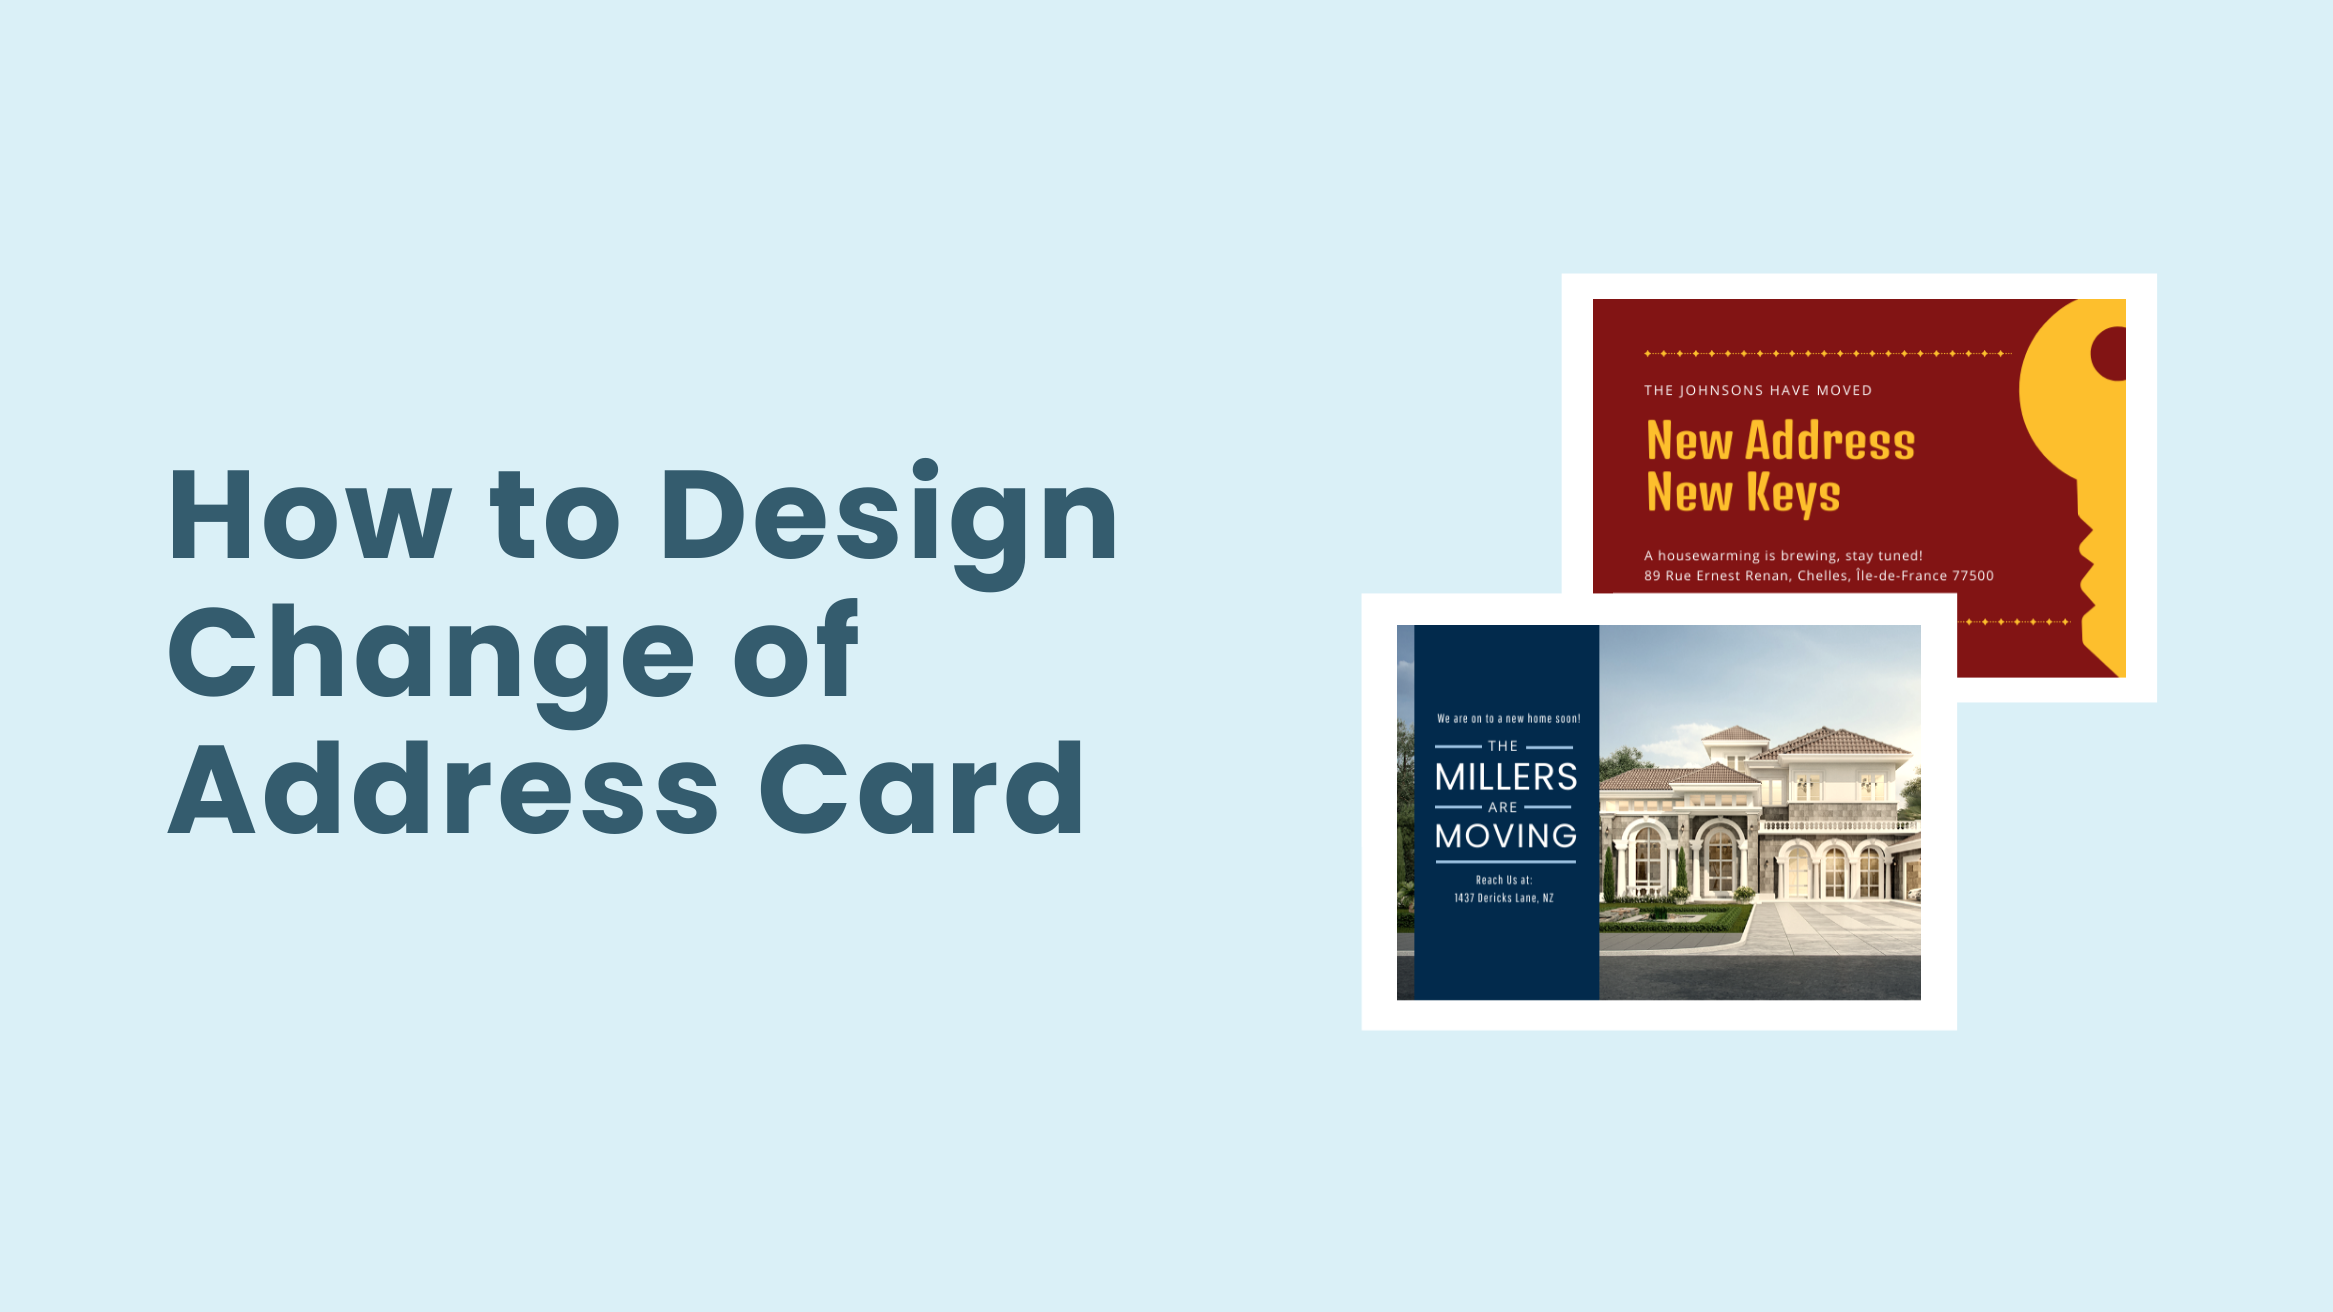 How to Design Change of Address Card